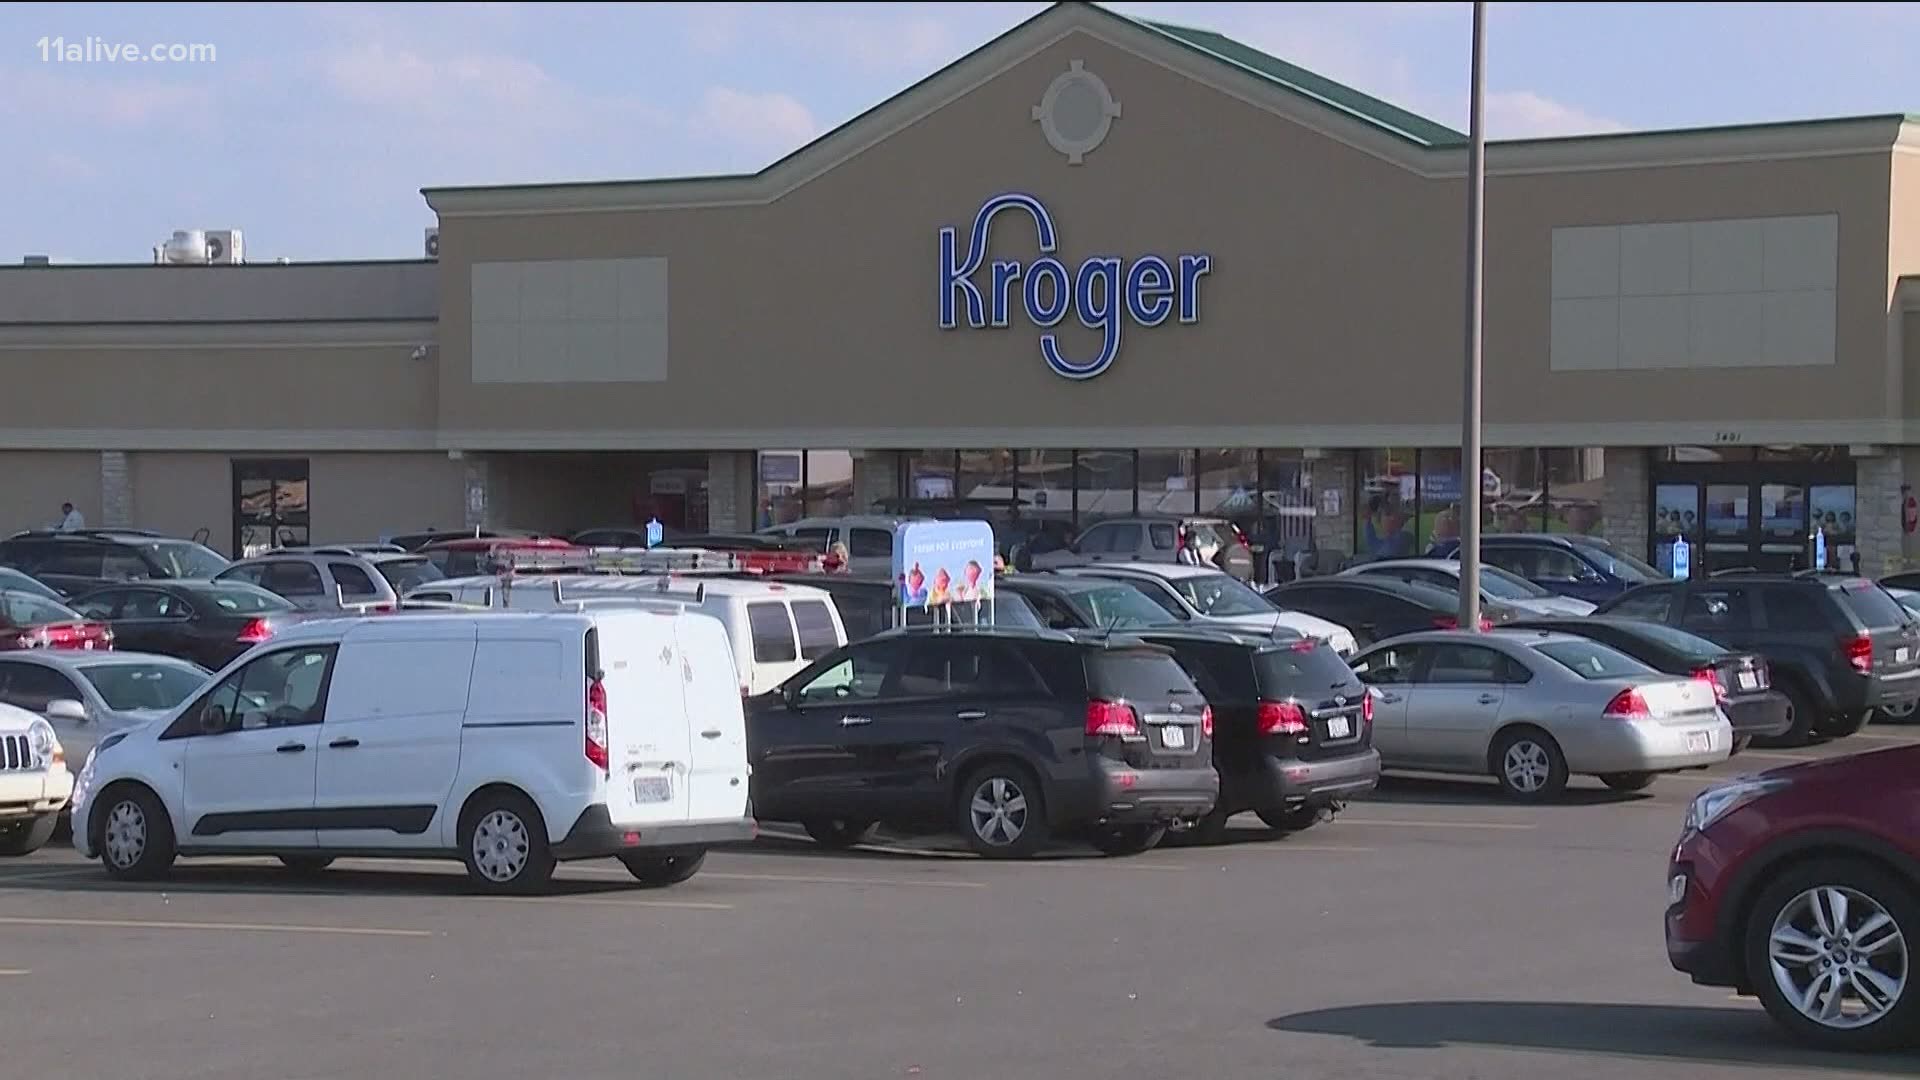 After backlash following the announcement Kroger plans to end hazard pay for employees, they announced "thank you" bonuses.